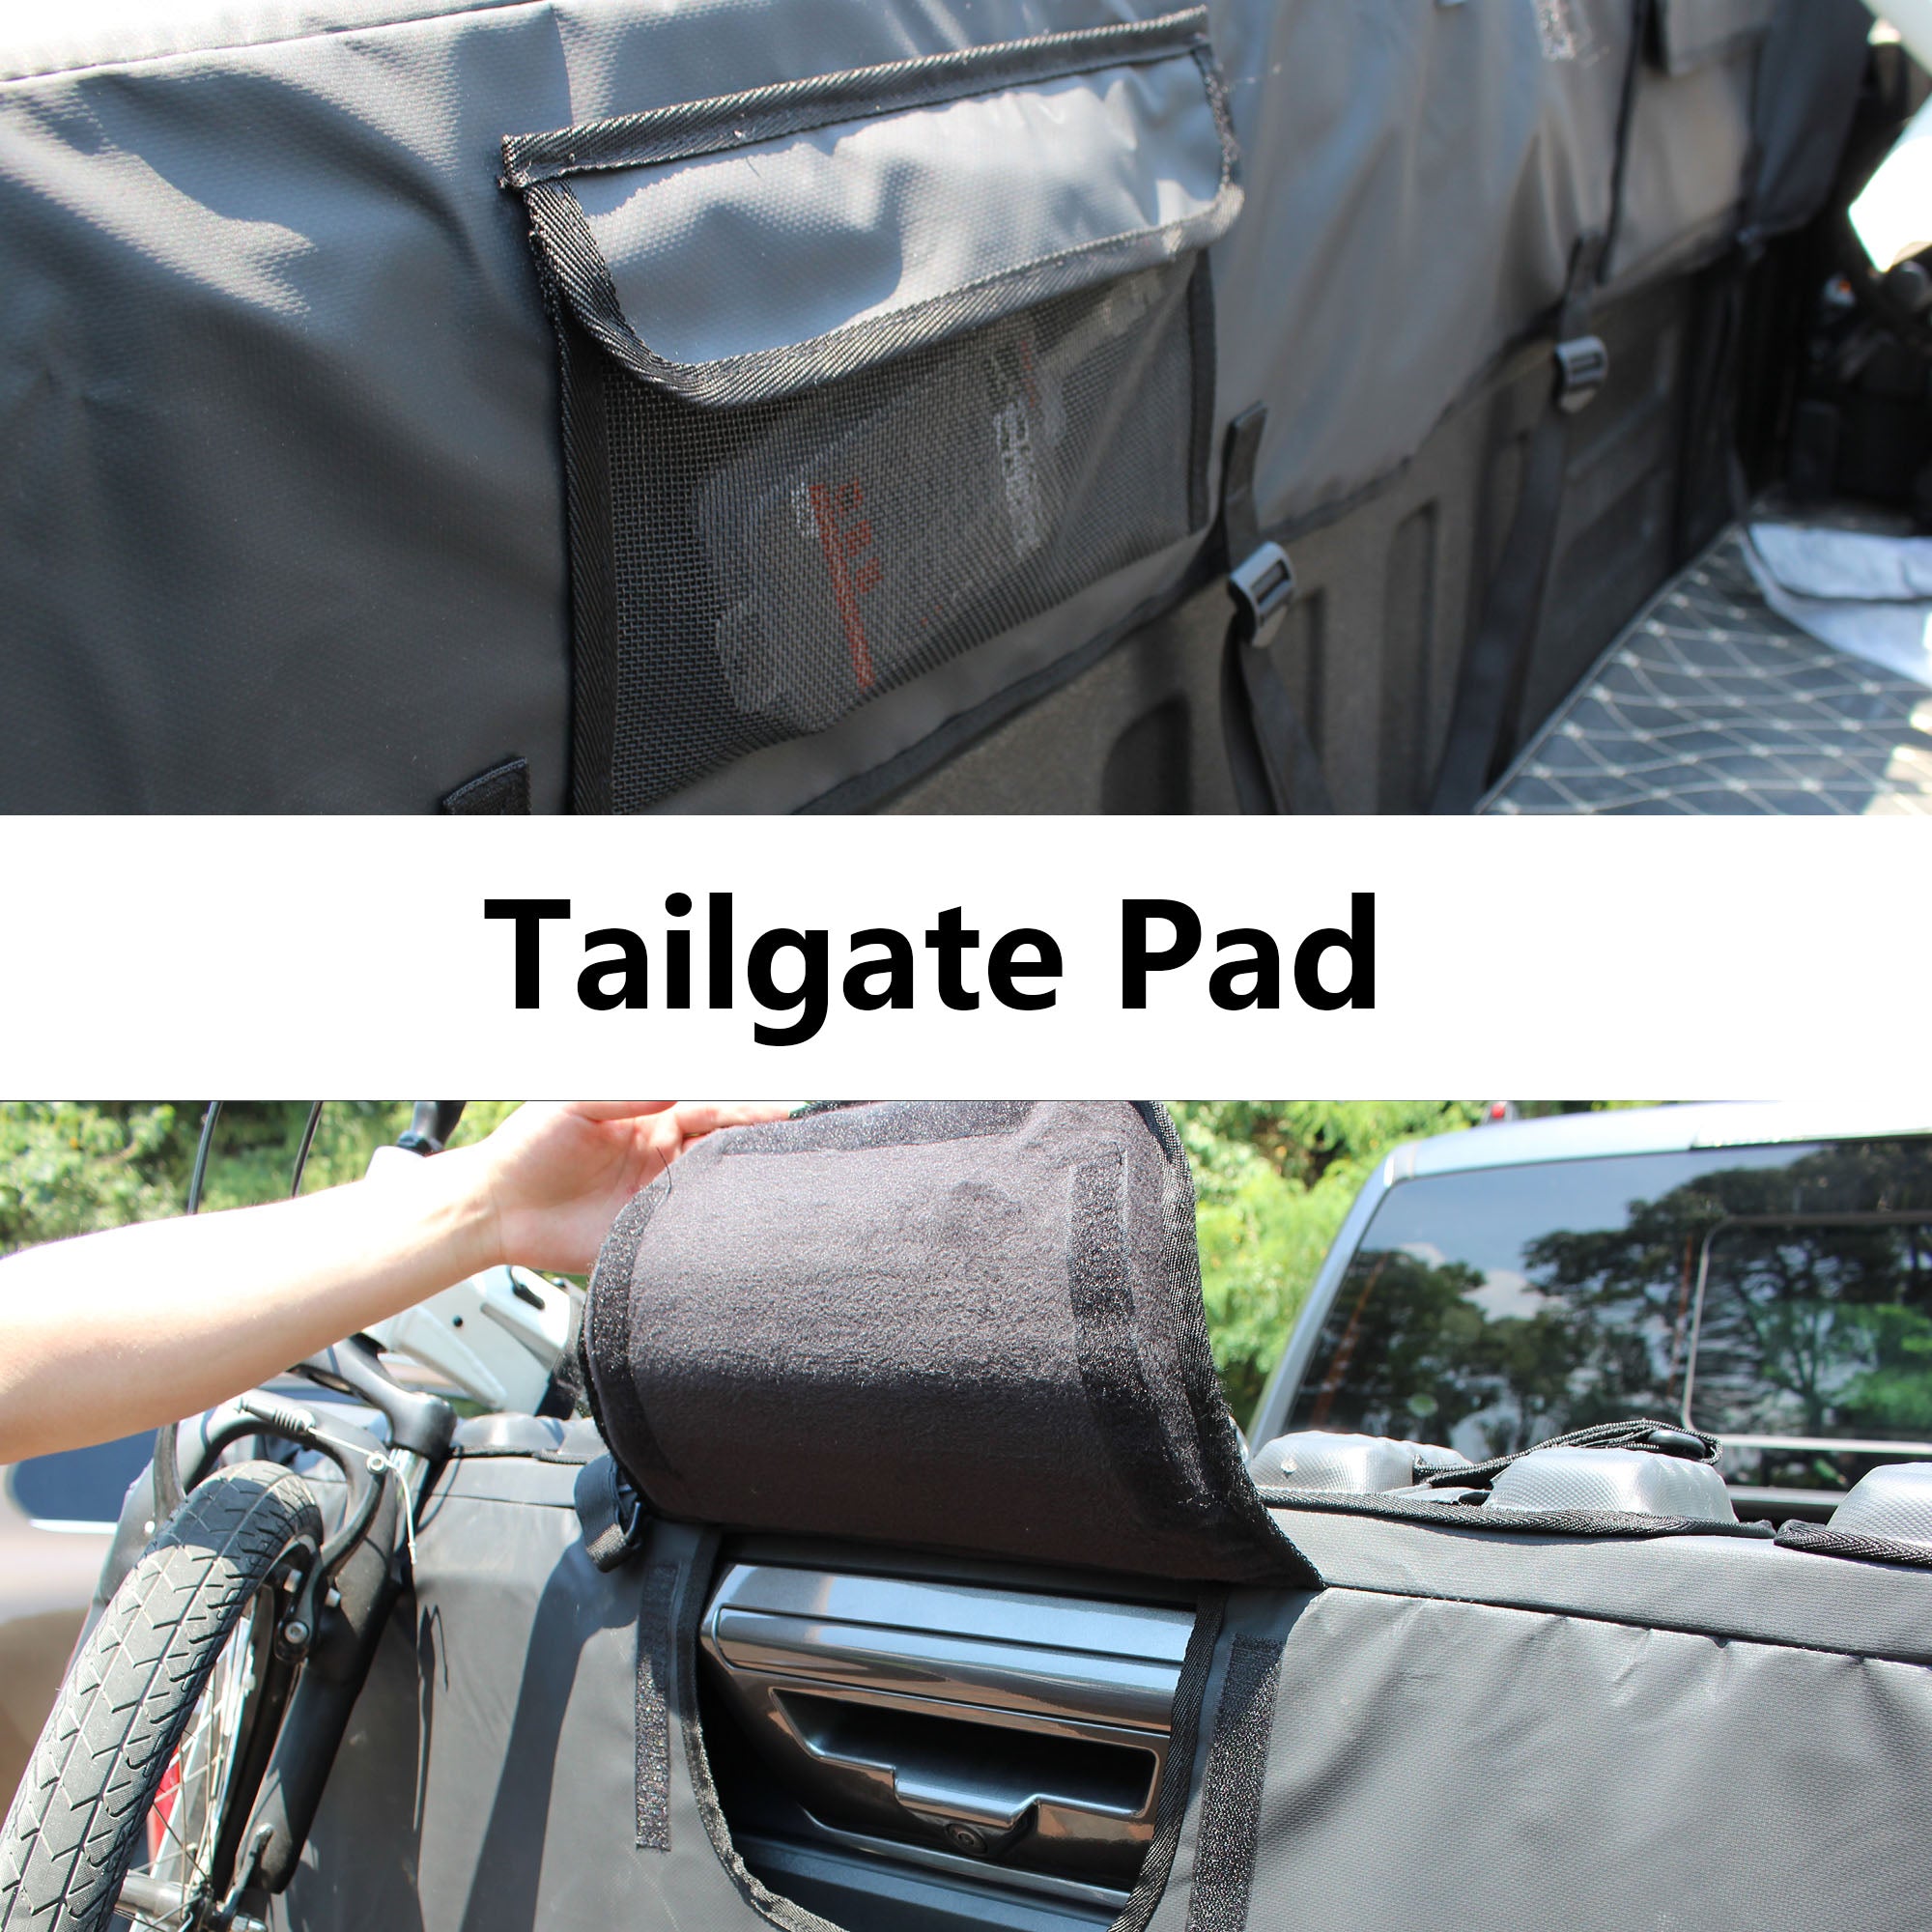 CMC Tailgate Pad for Mountain Bikes, Tailgate Trucks Protection Pad, Fits Most Trucks Carries Up to 5 Bikes